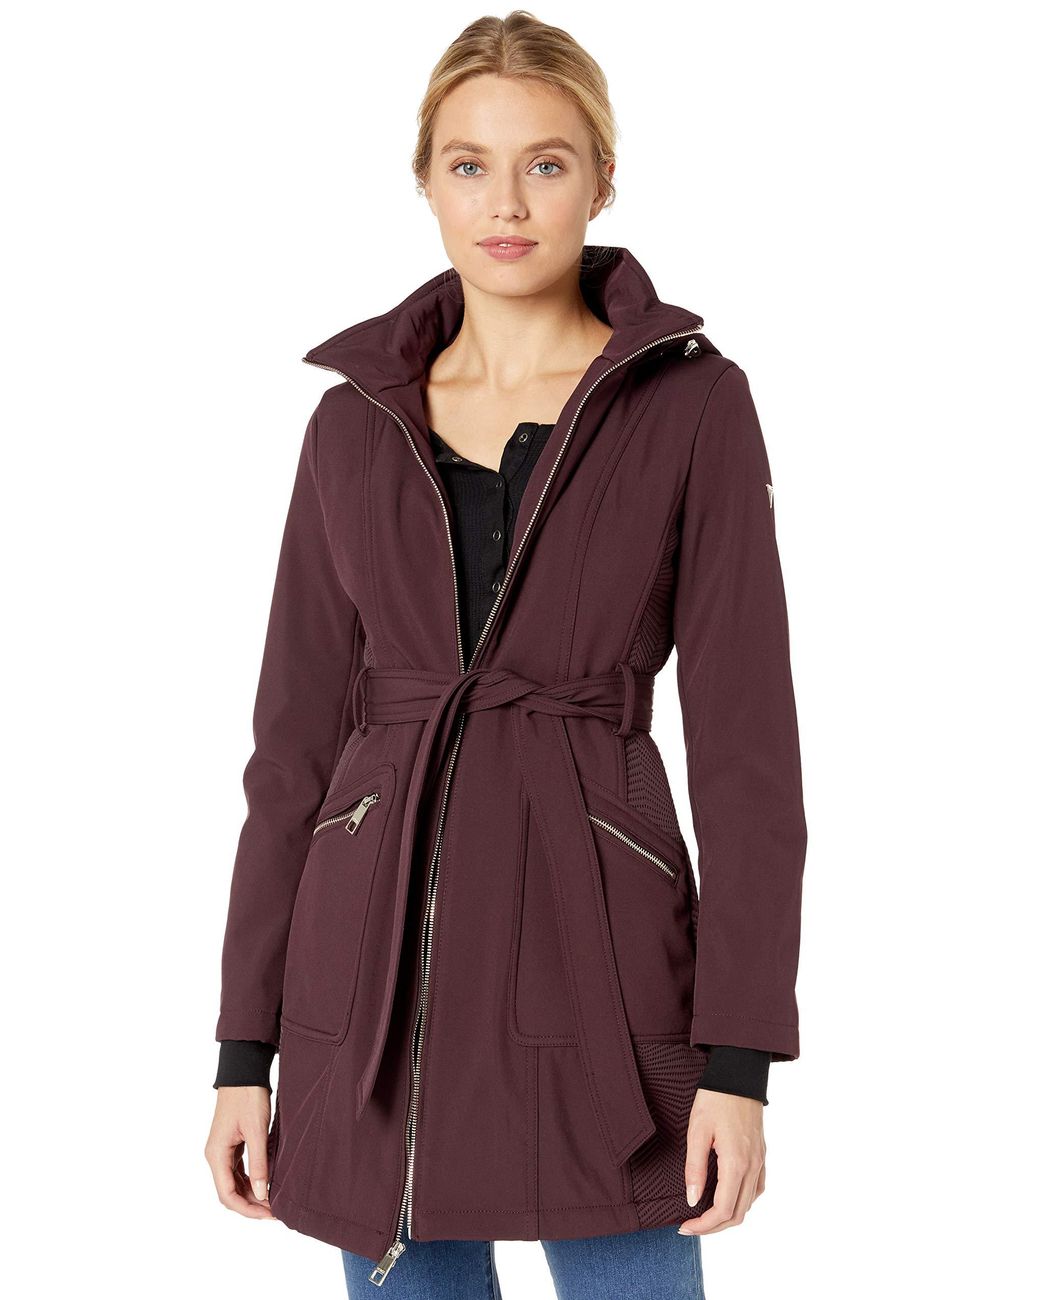 GUESS Women's Knee Length Packable Puffer Coat with Hood and Stand Collar 